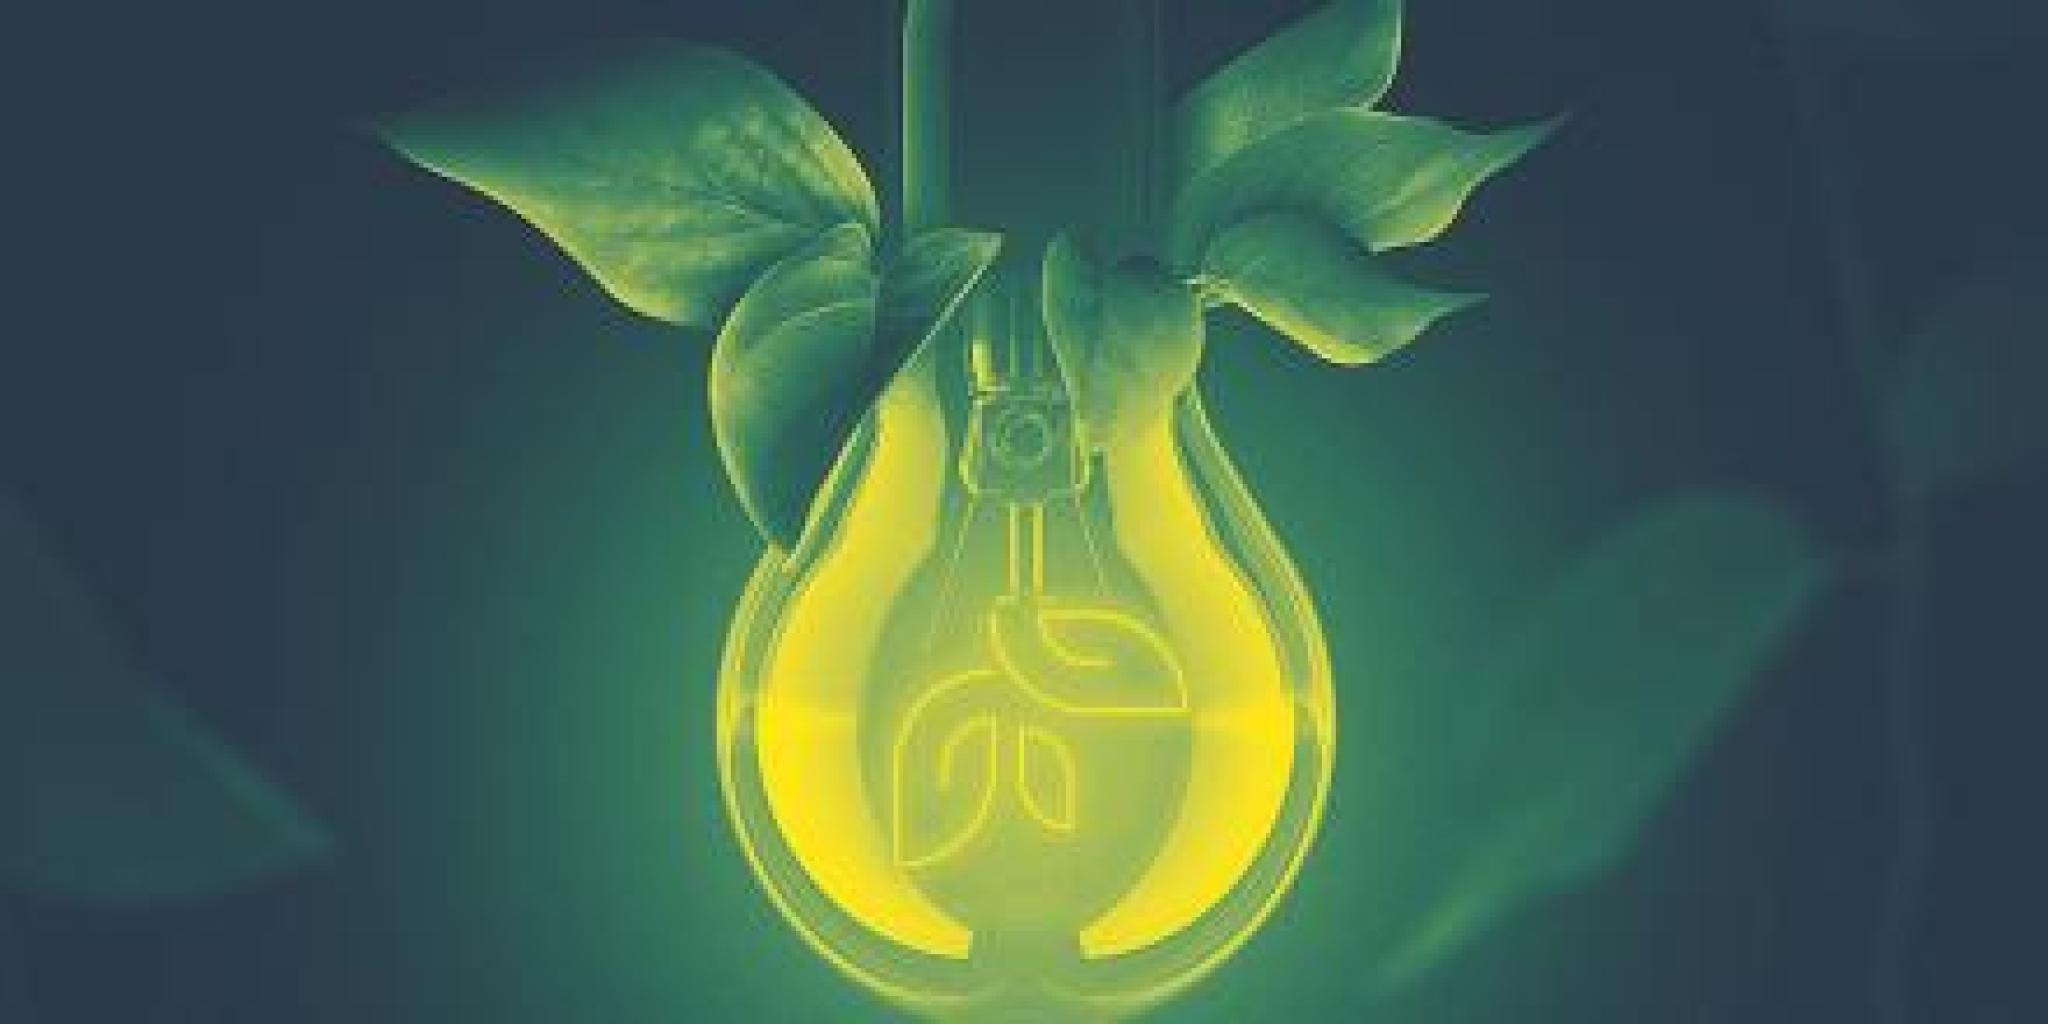 Image: Conversations 3, Opportunities. Leafy Lightbulb